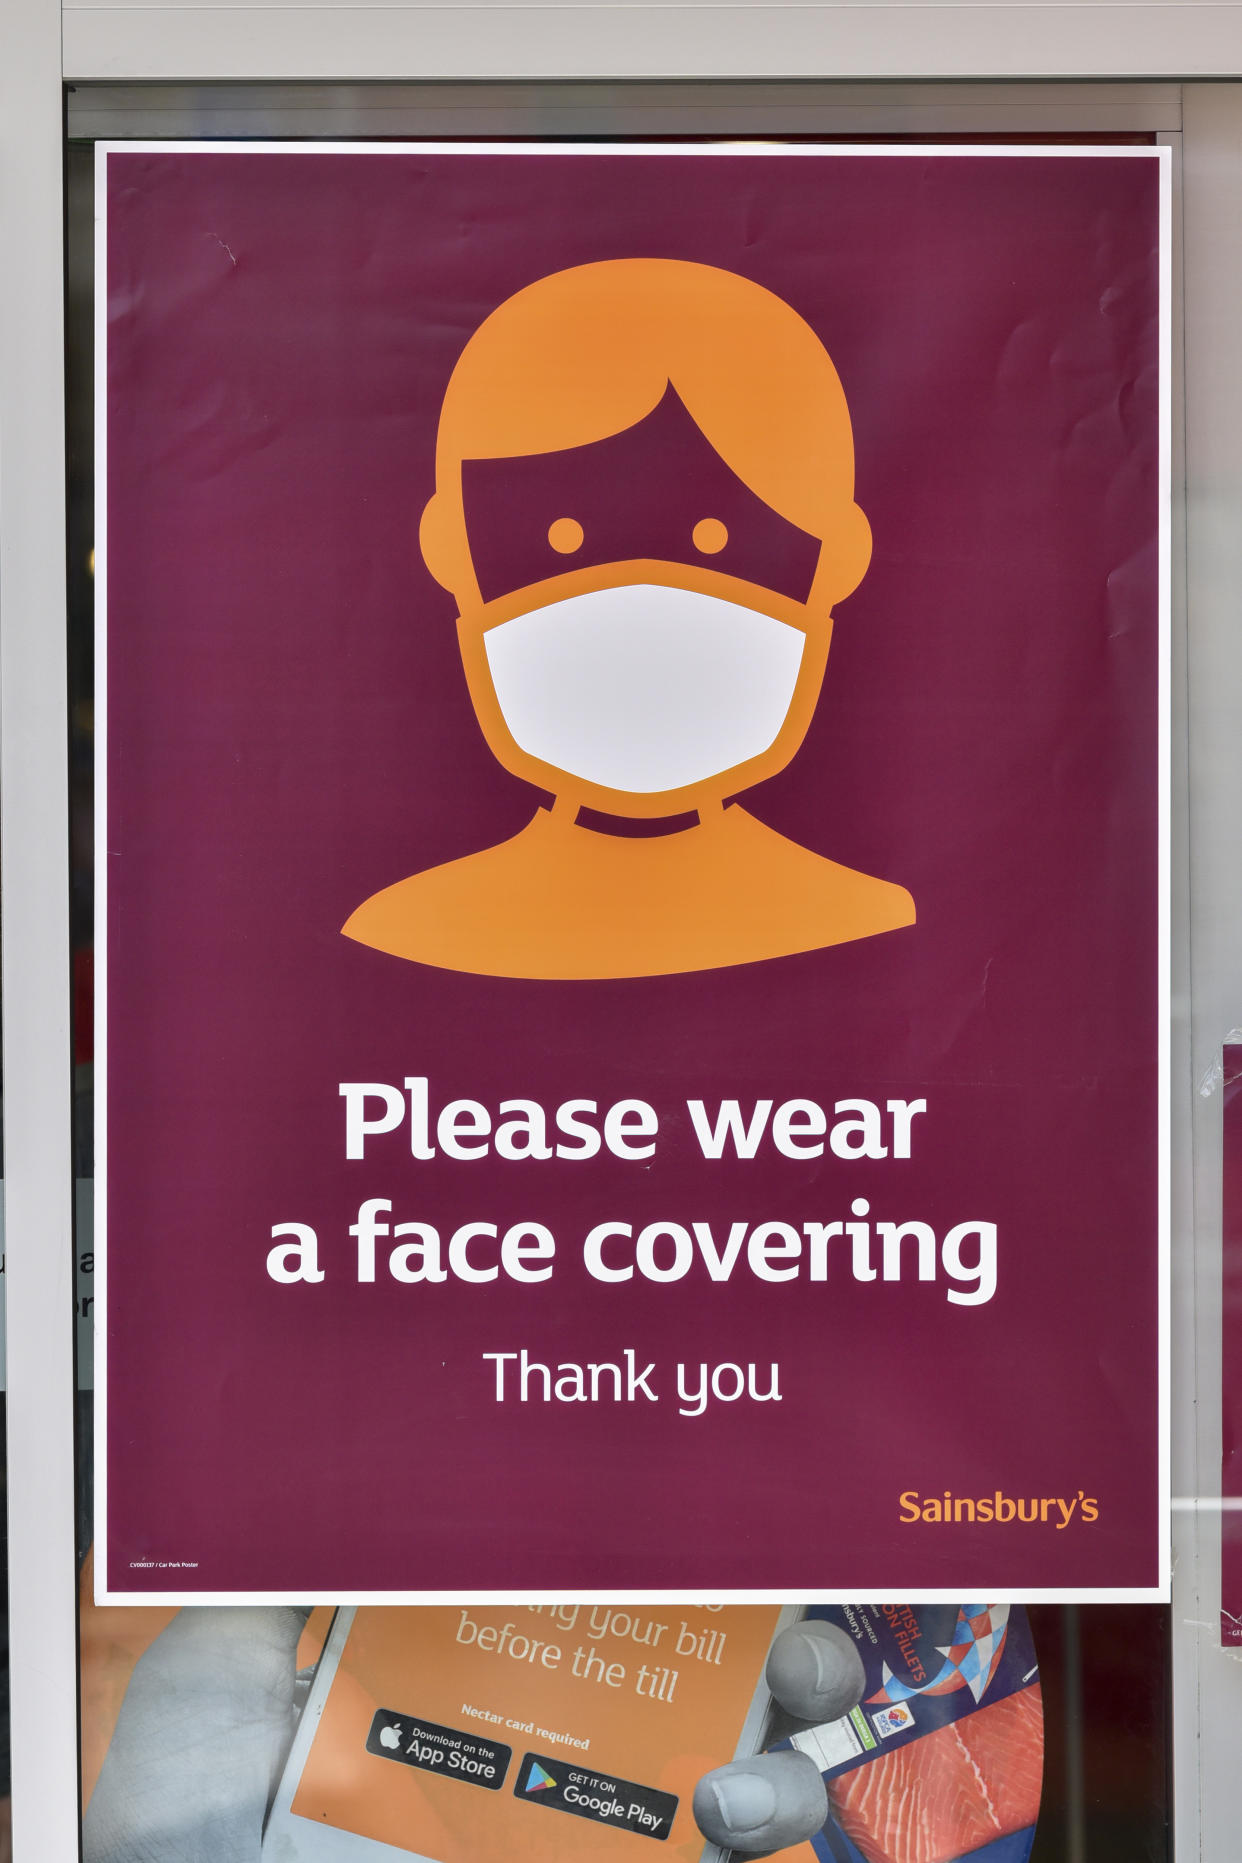 LONDON, UNITED KINGDOM - 2020/07/28: A sign advising customers to wear protective face covering is displayed at Sainsburys store. The Government has made it mandatory to wear face coverings on all public transport and in different places like shops, banks and post offices as well as shops, supermarkets, indoor shopping centres and stations in England. (Photo by Dave Rushen/SOPA Images/LightRocket via Getty Images)